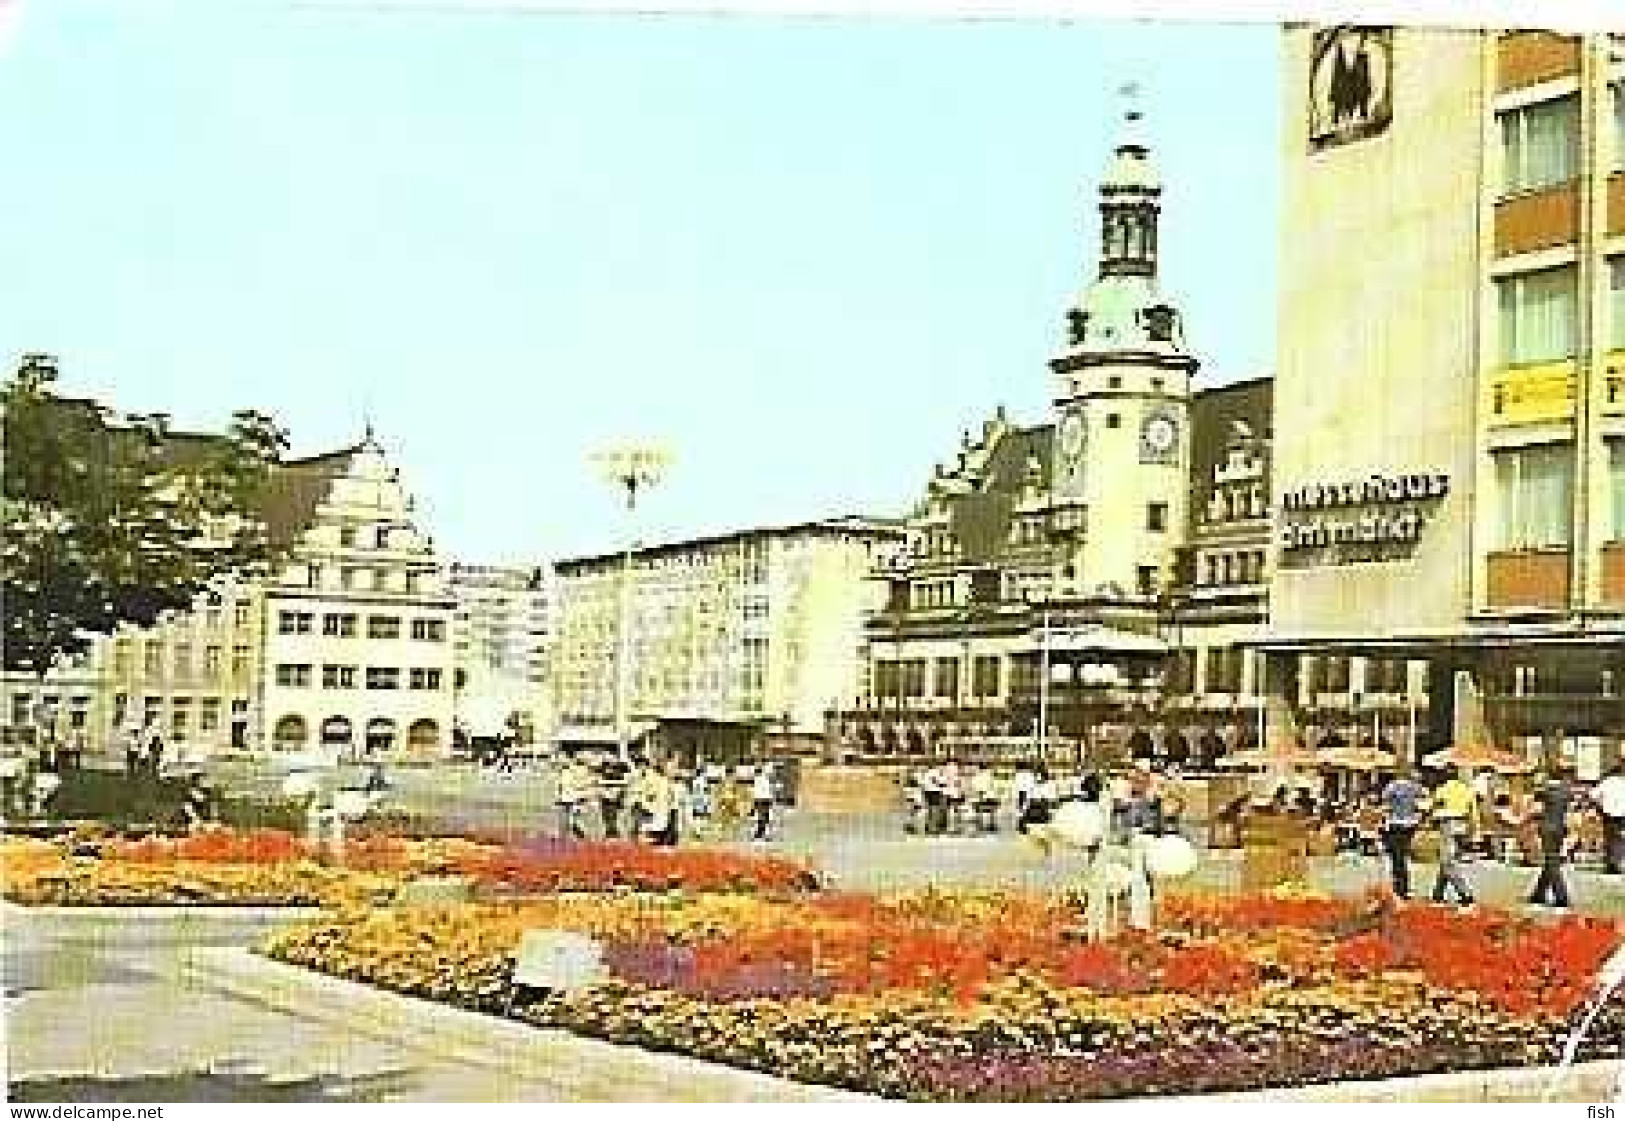 Germany  & Messesstadt Leipzig , Altes Rathaus Am Markt, Karl Marx Stad DDR To  Oeiras Portugal 1983 (7776) - Lettres & Documents